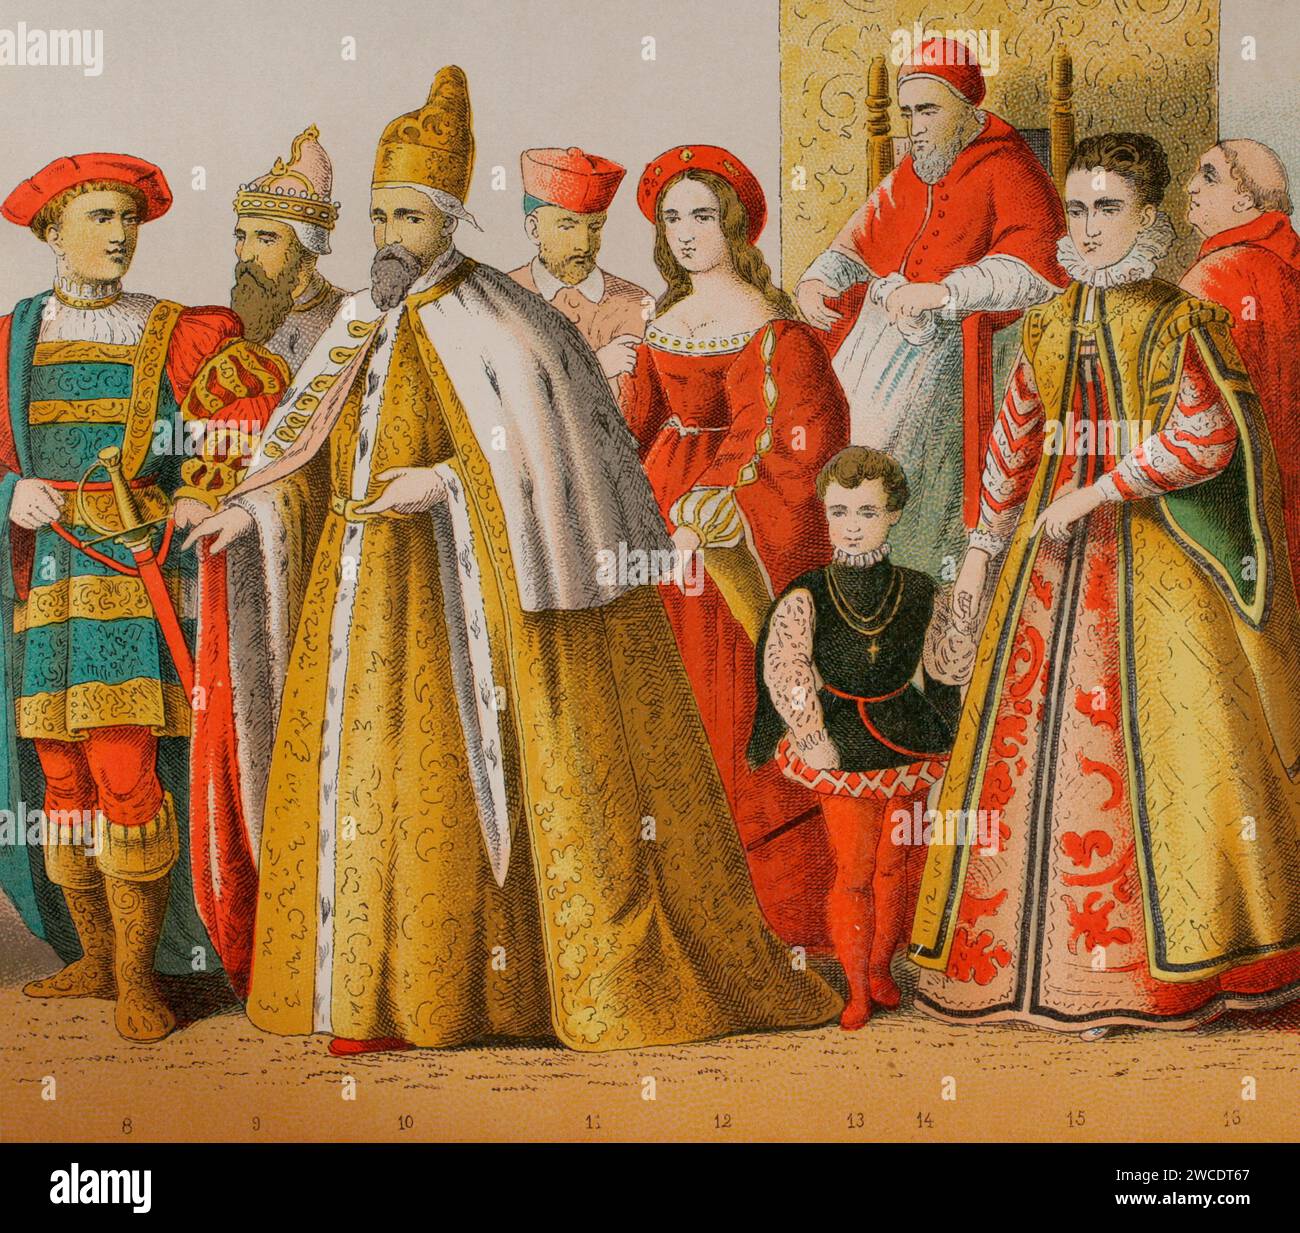 History of Italy. 1500. From left to right, 8: Venetian knight, 9-10: Doge of Venice, 11: cardinal, 12-13: high-class ladies, 14: Pope Julius II, 15: high-class lady, 16: cardinal. Chromolithography. 'Historia Universal', by César Cantú. Volume VIII, 1881. Stock Photo